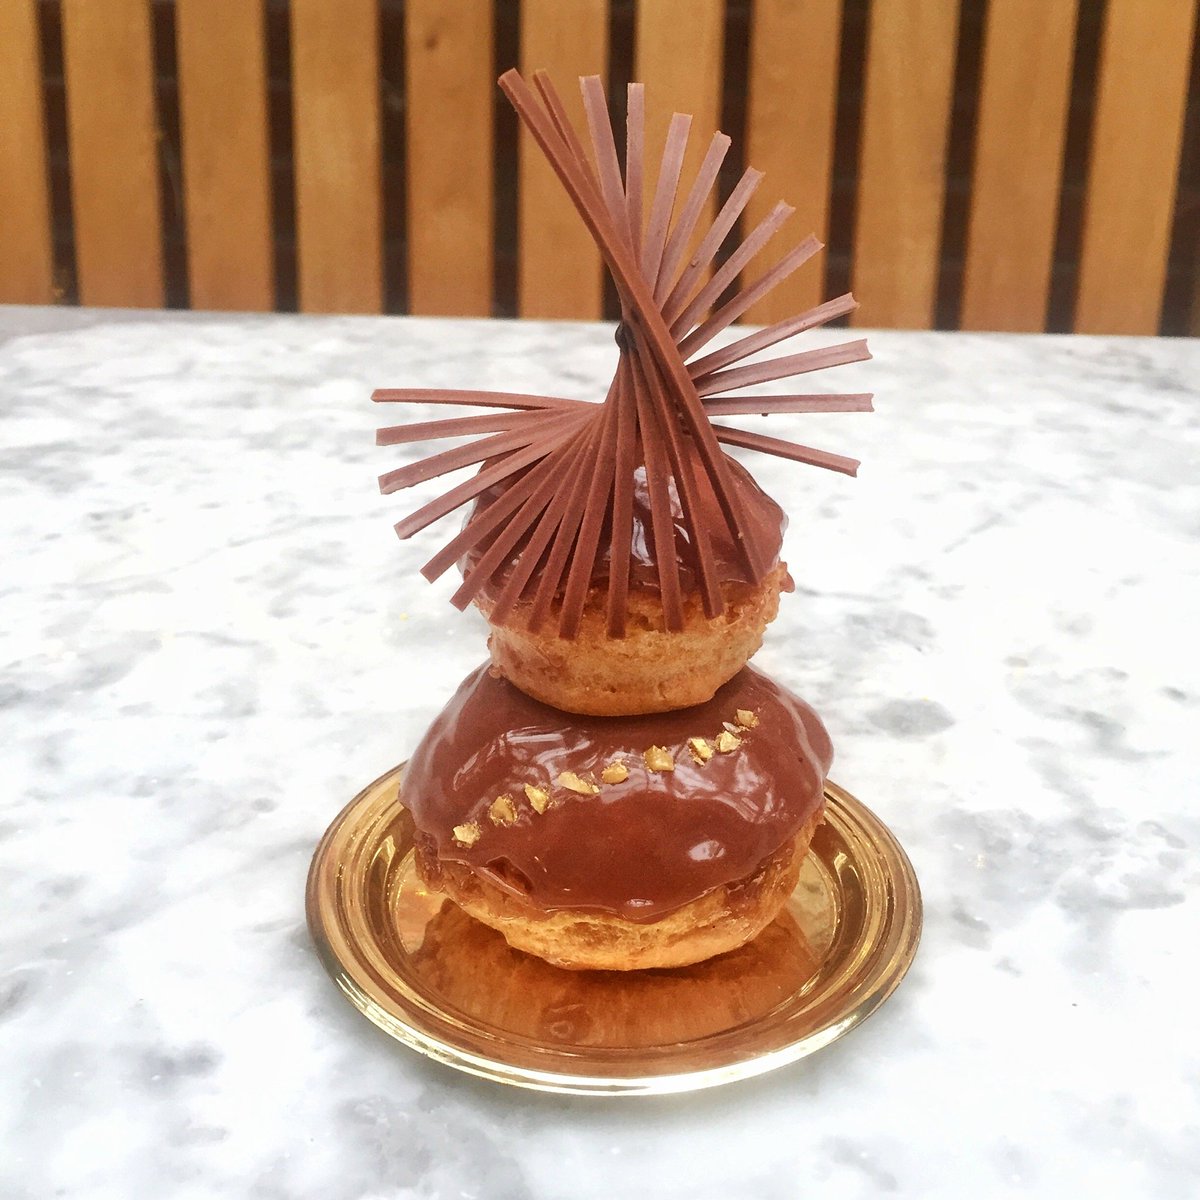 A closer look at our Coconut Hazelnut Religieuse, an elegant double-decker cream puff filled with hazelnut pastry cream and coconut ganache, and topped with a spiral of milk chocolate pieces each hand-placed on one by one. Available daily at the bakery. #DABLondon